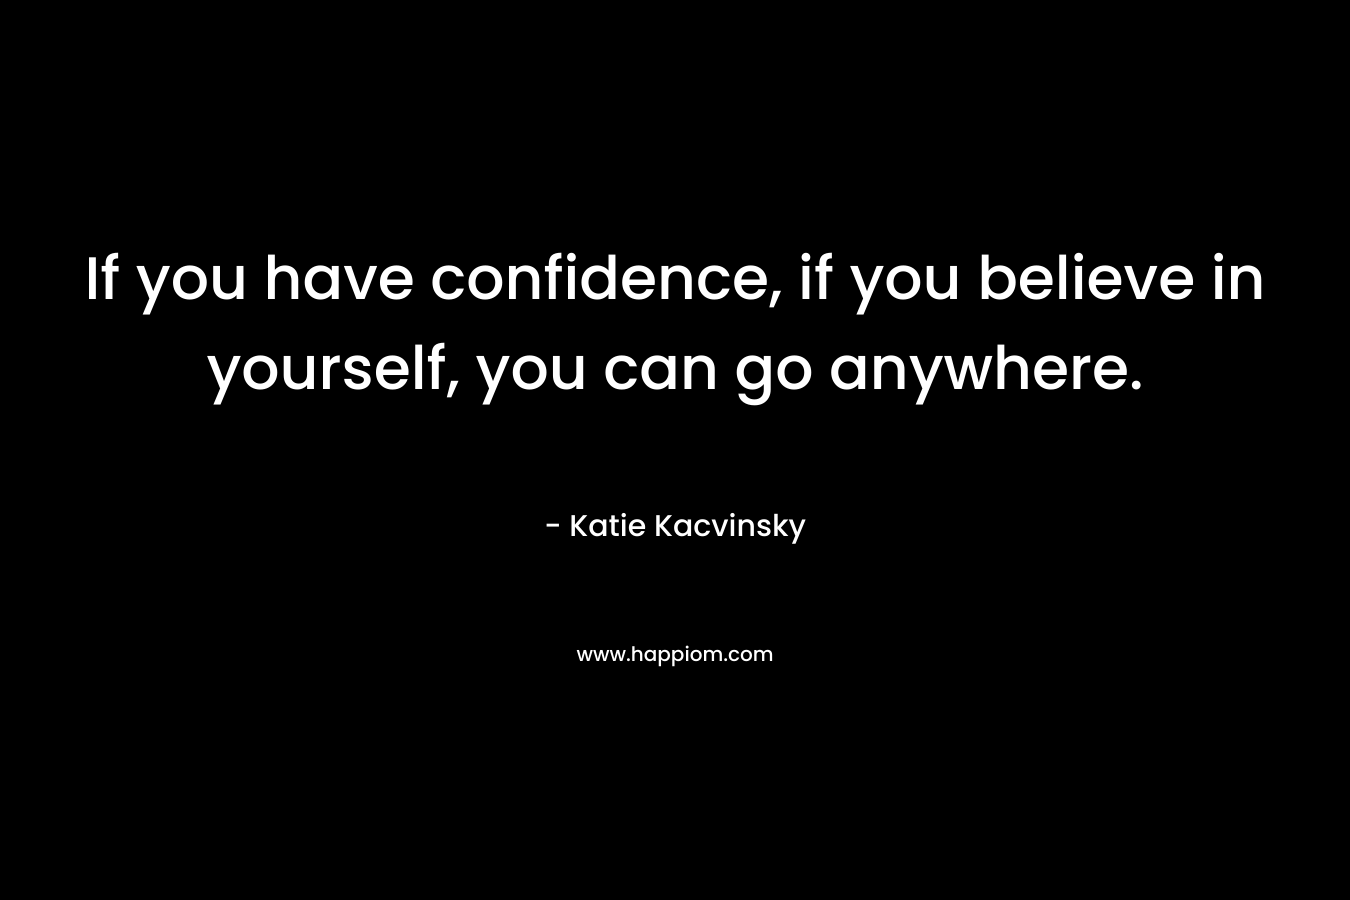 If you have confidence, if you believe in yourself, you can go anywhere.